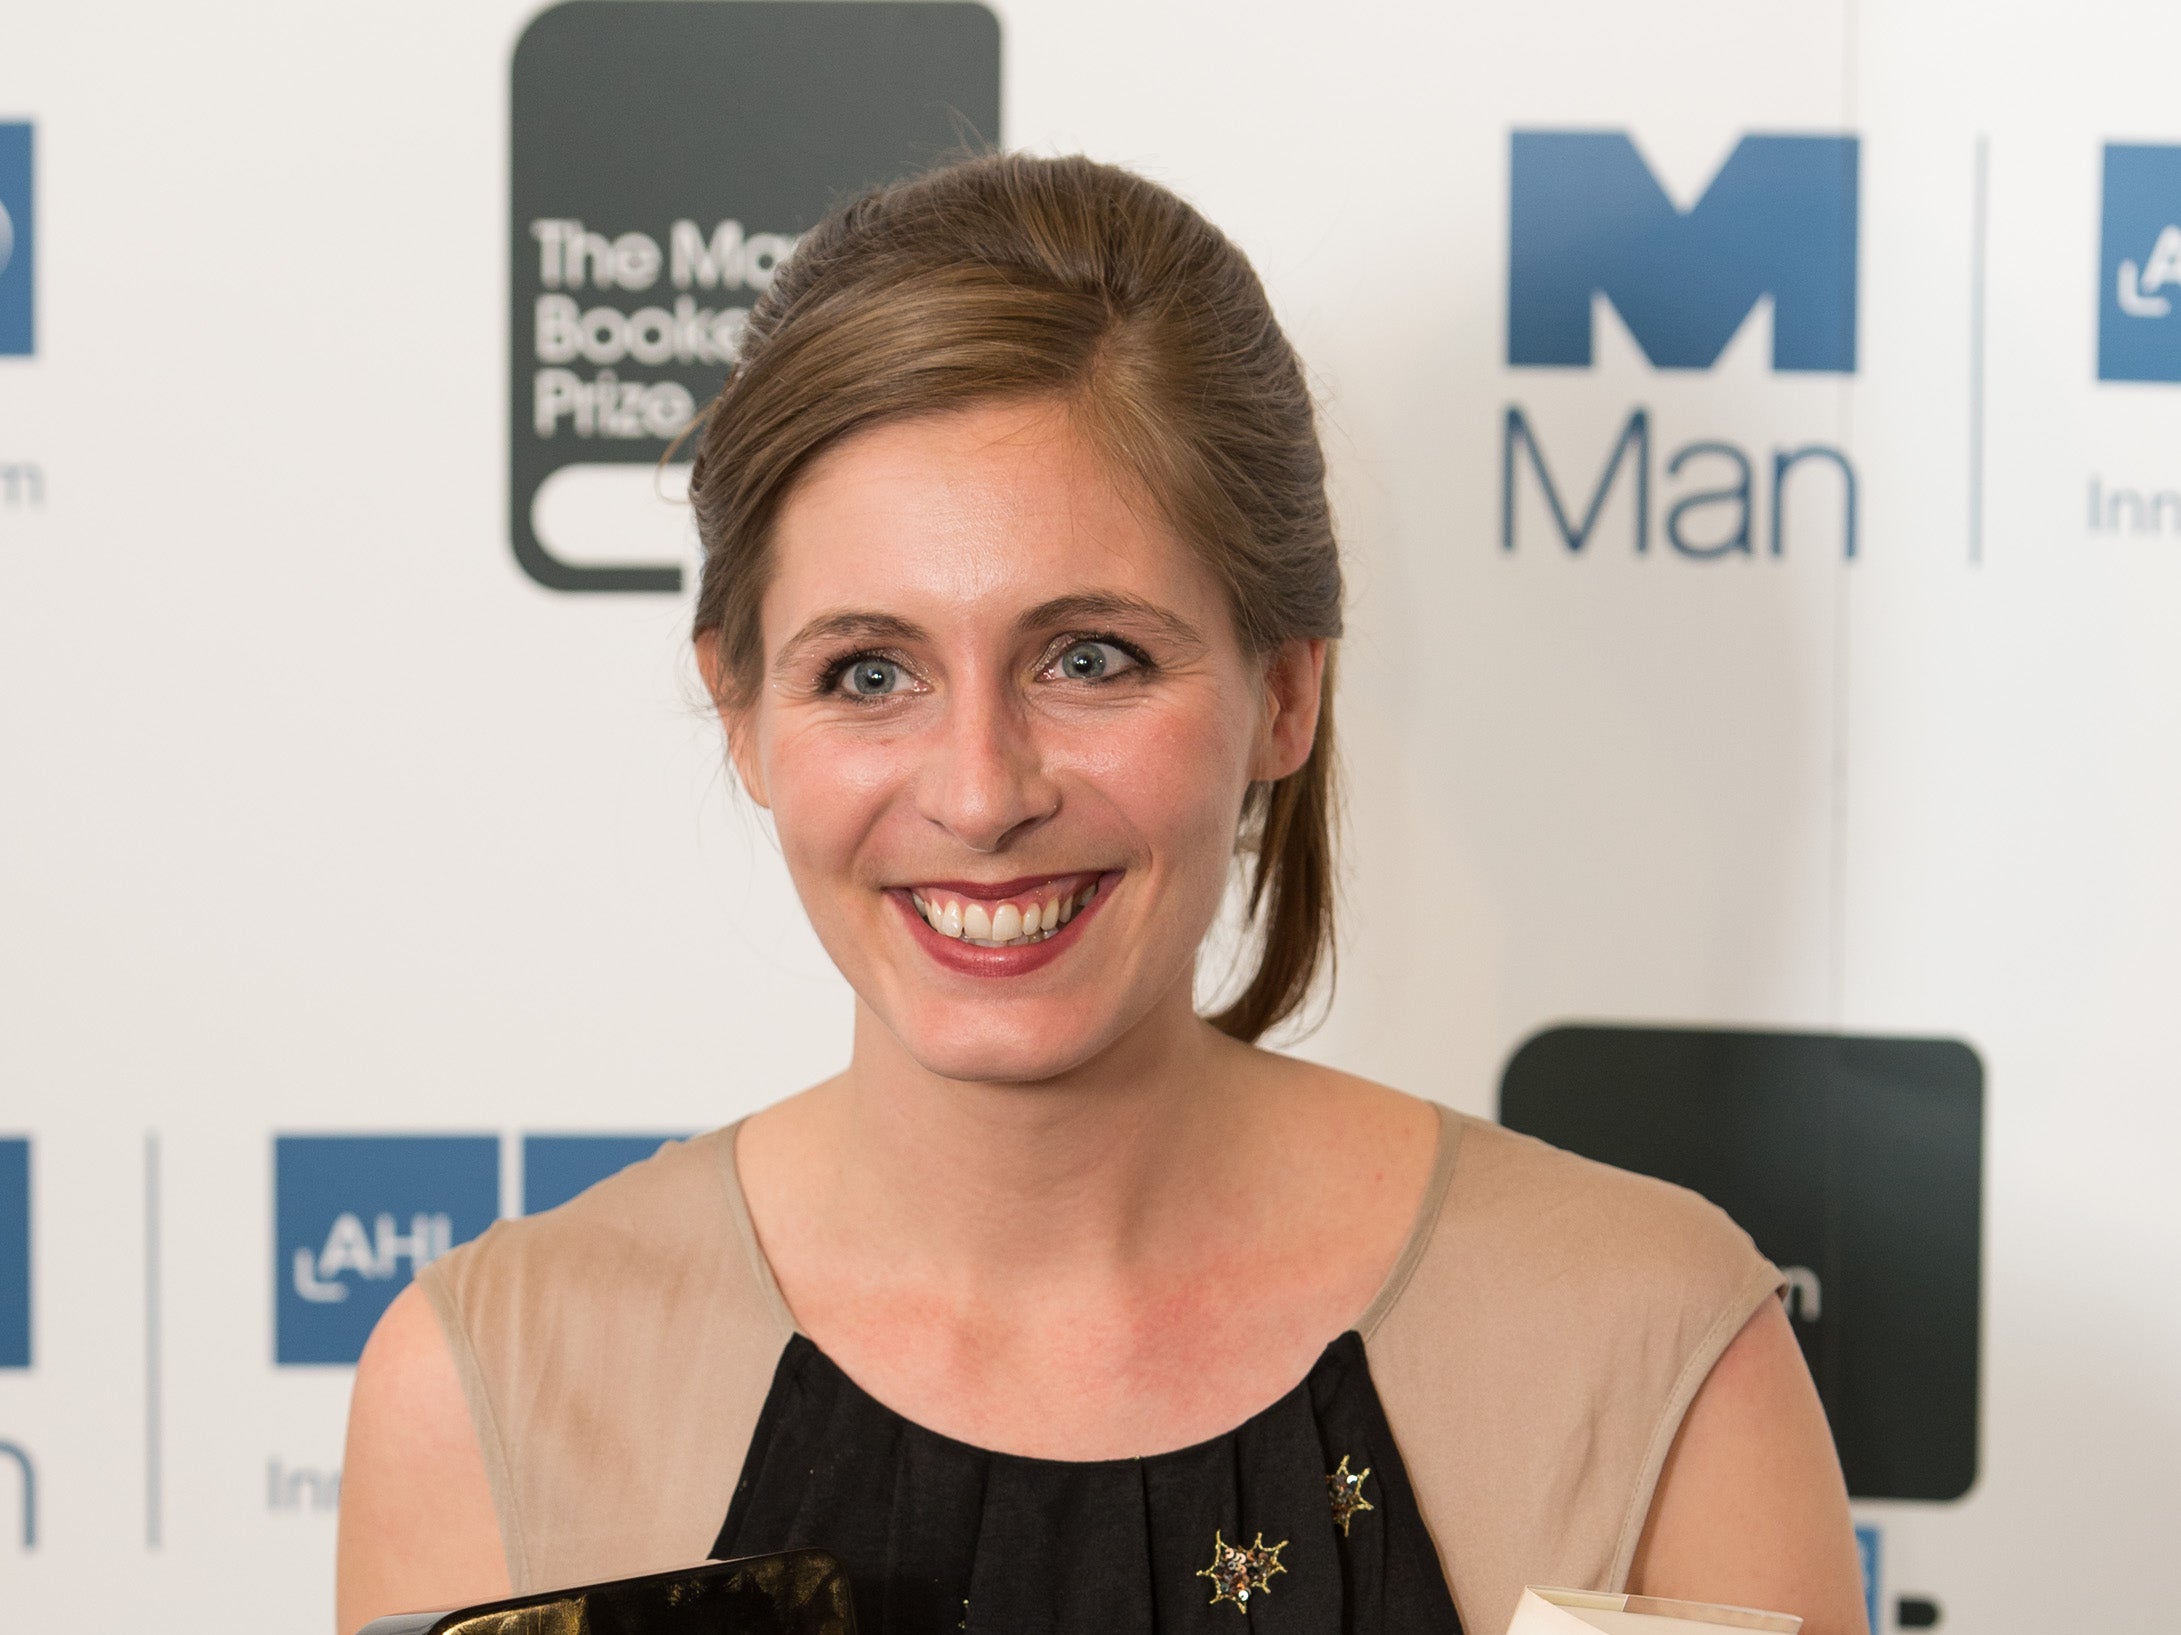 Eleanor Catton, pictured after winning the Man Booker Prize for Fiction in 2013